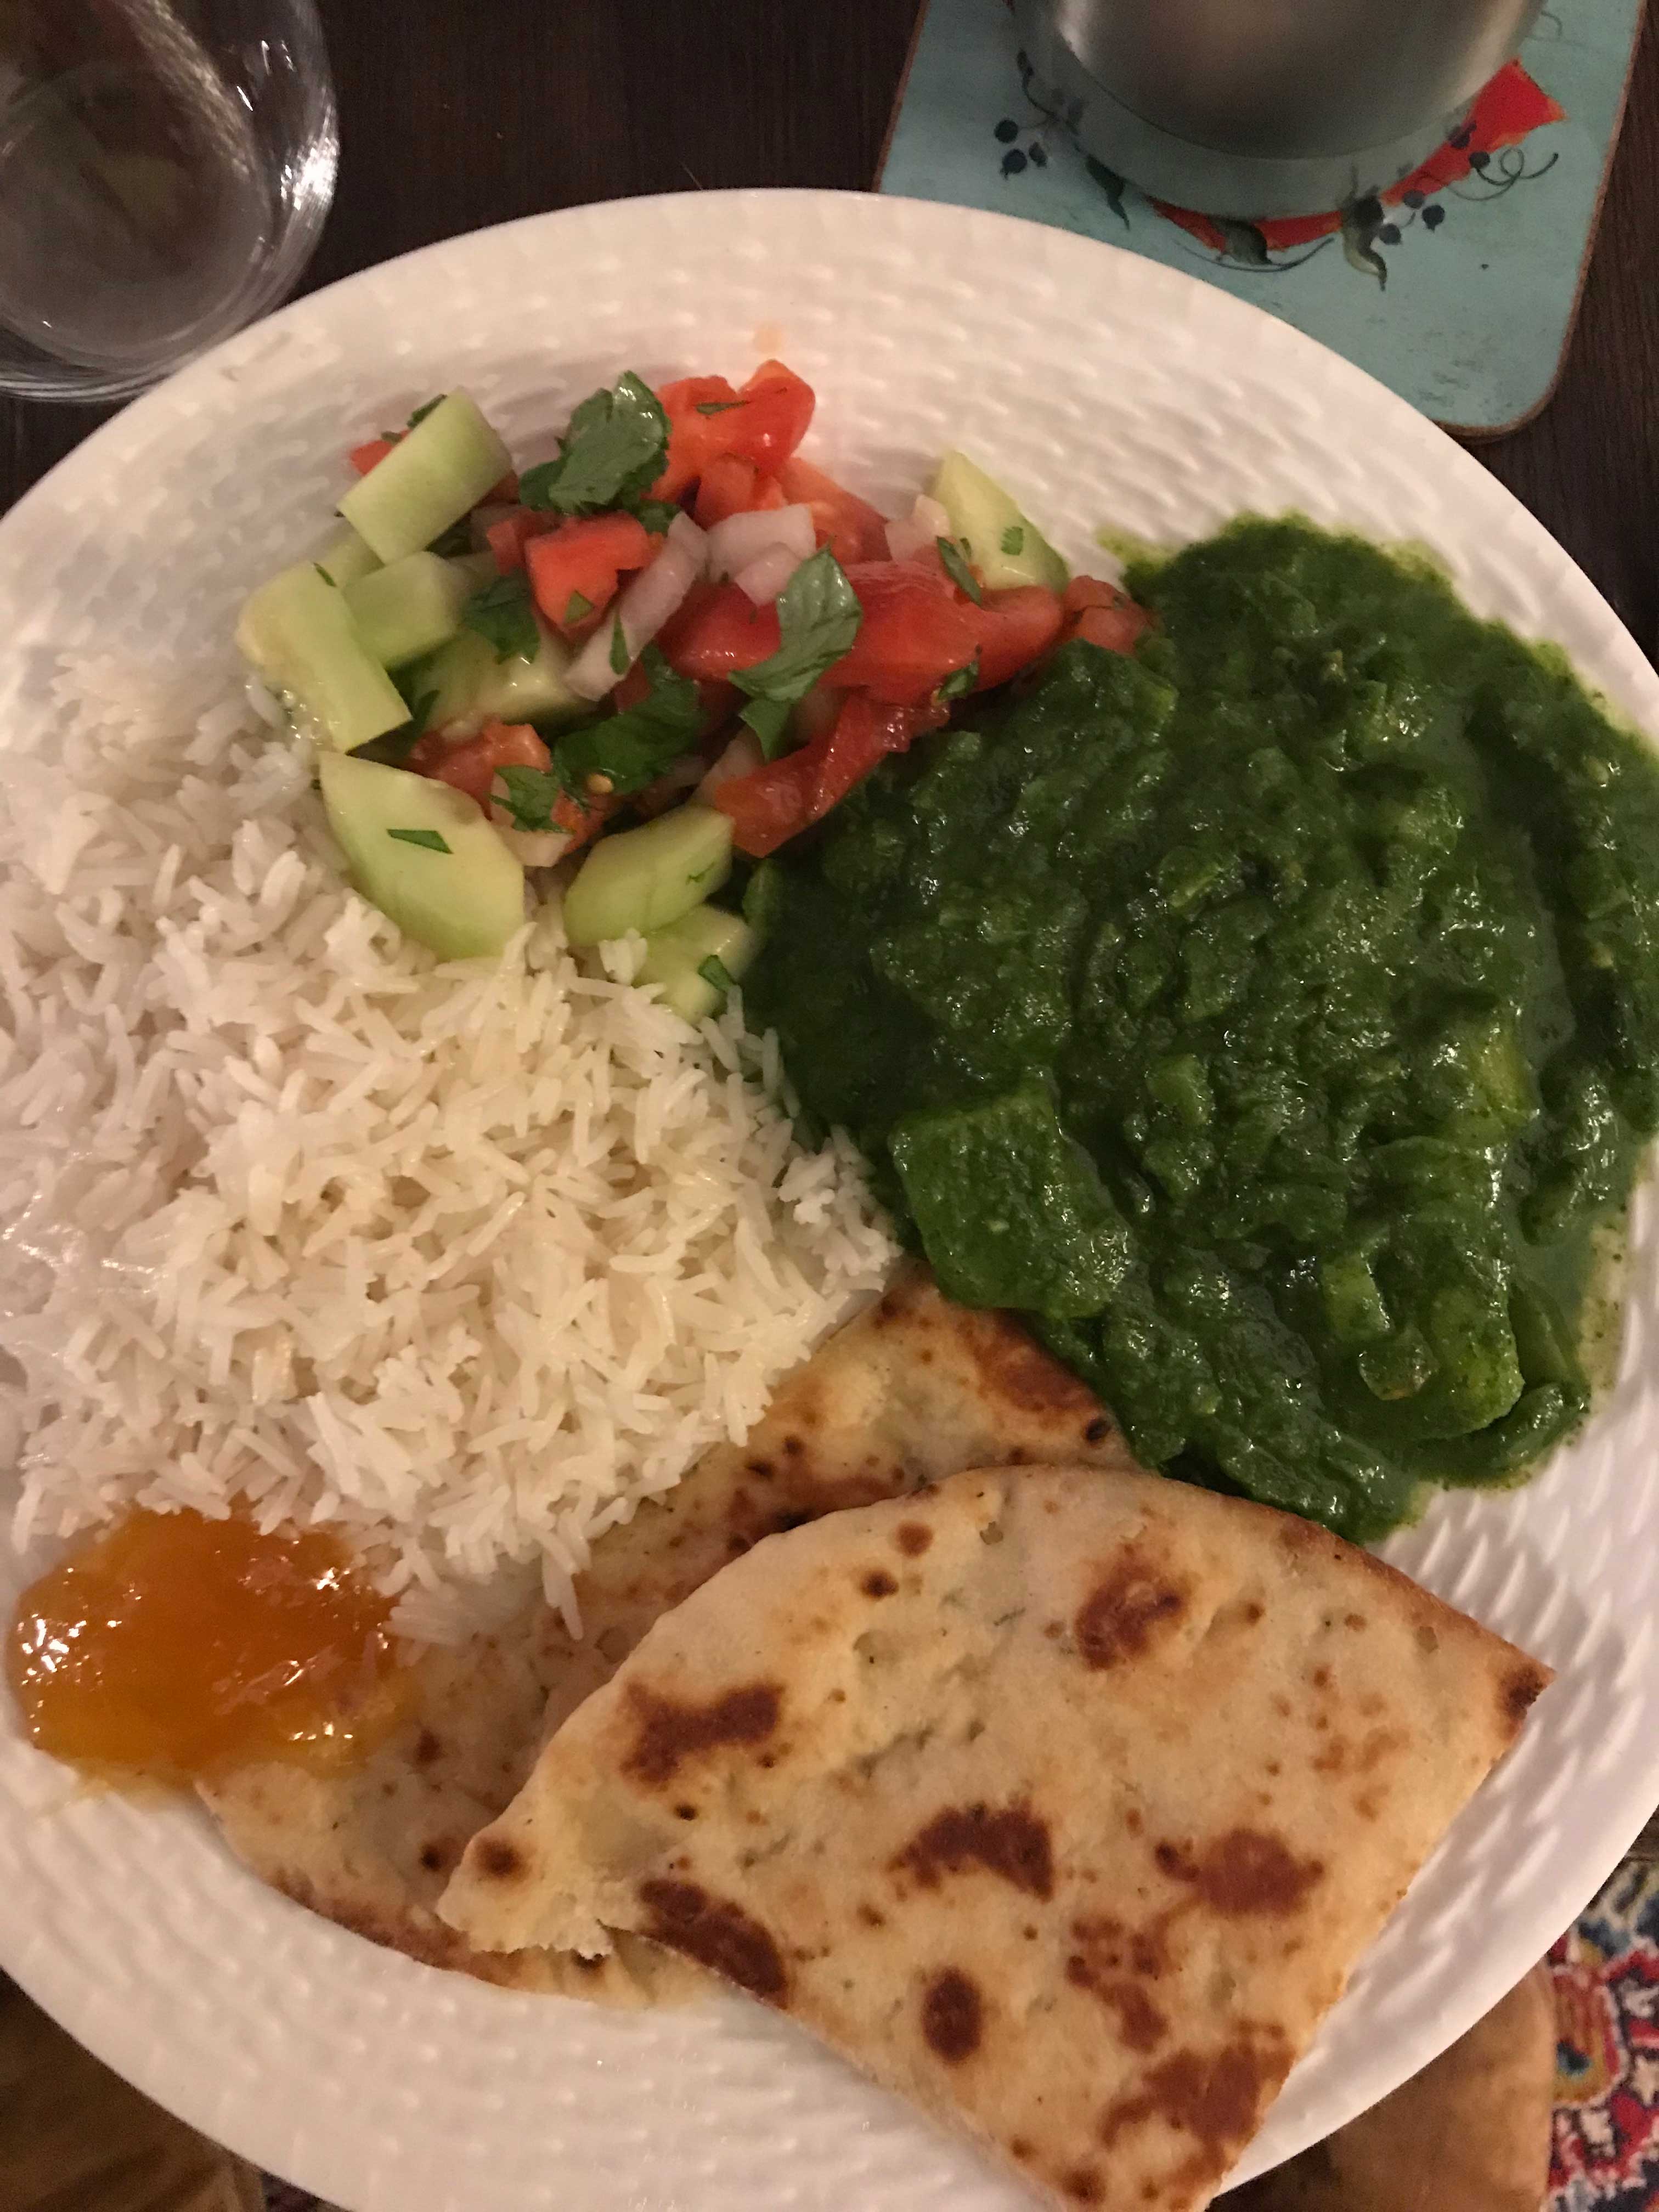 Food: I’ve been on an Indian Food Kick